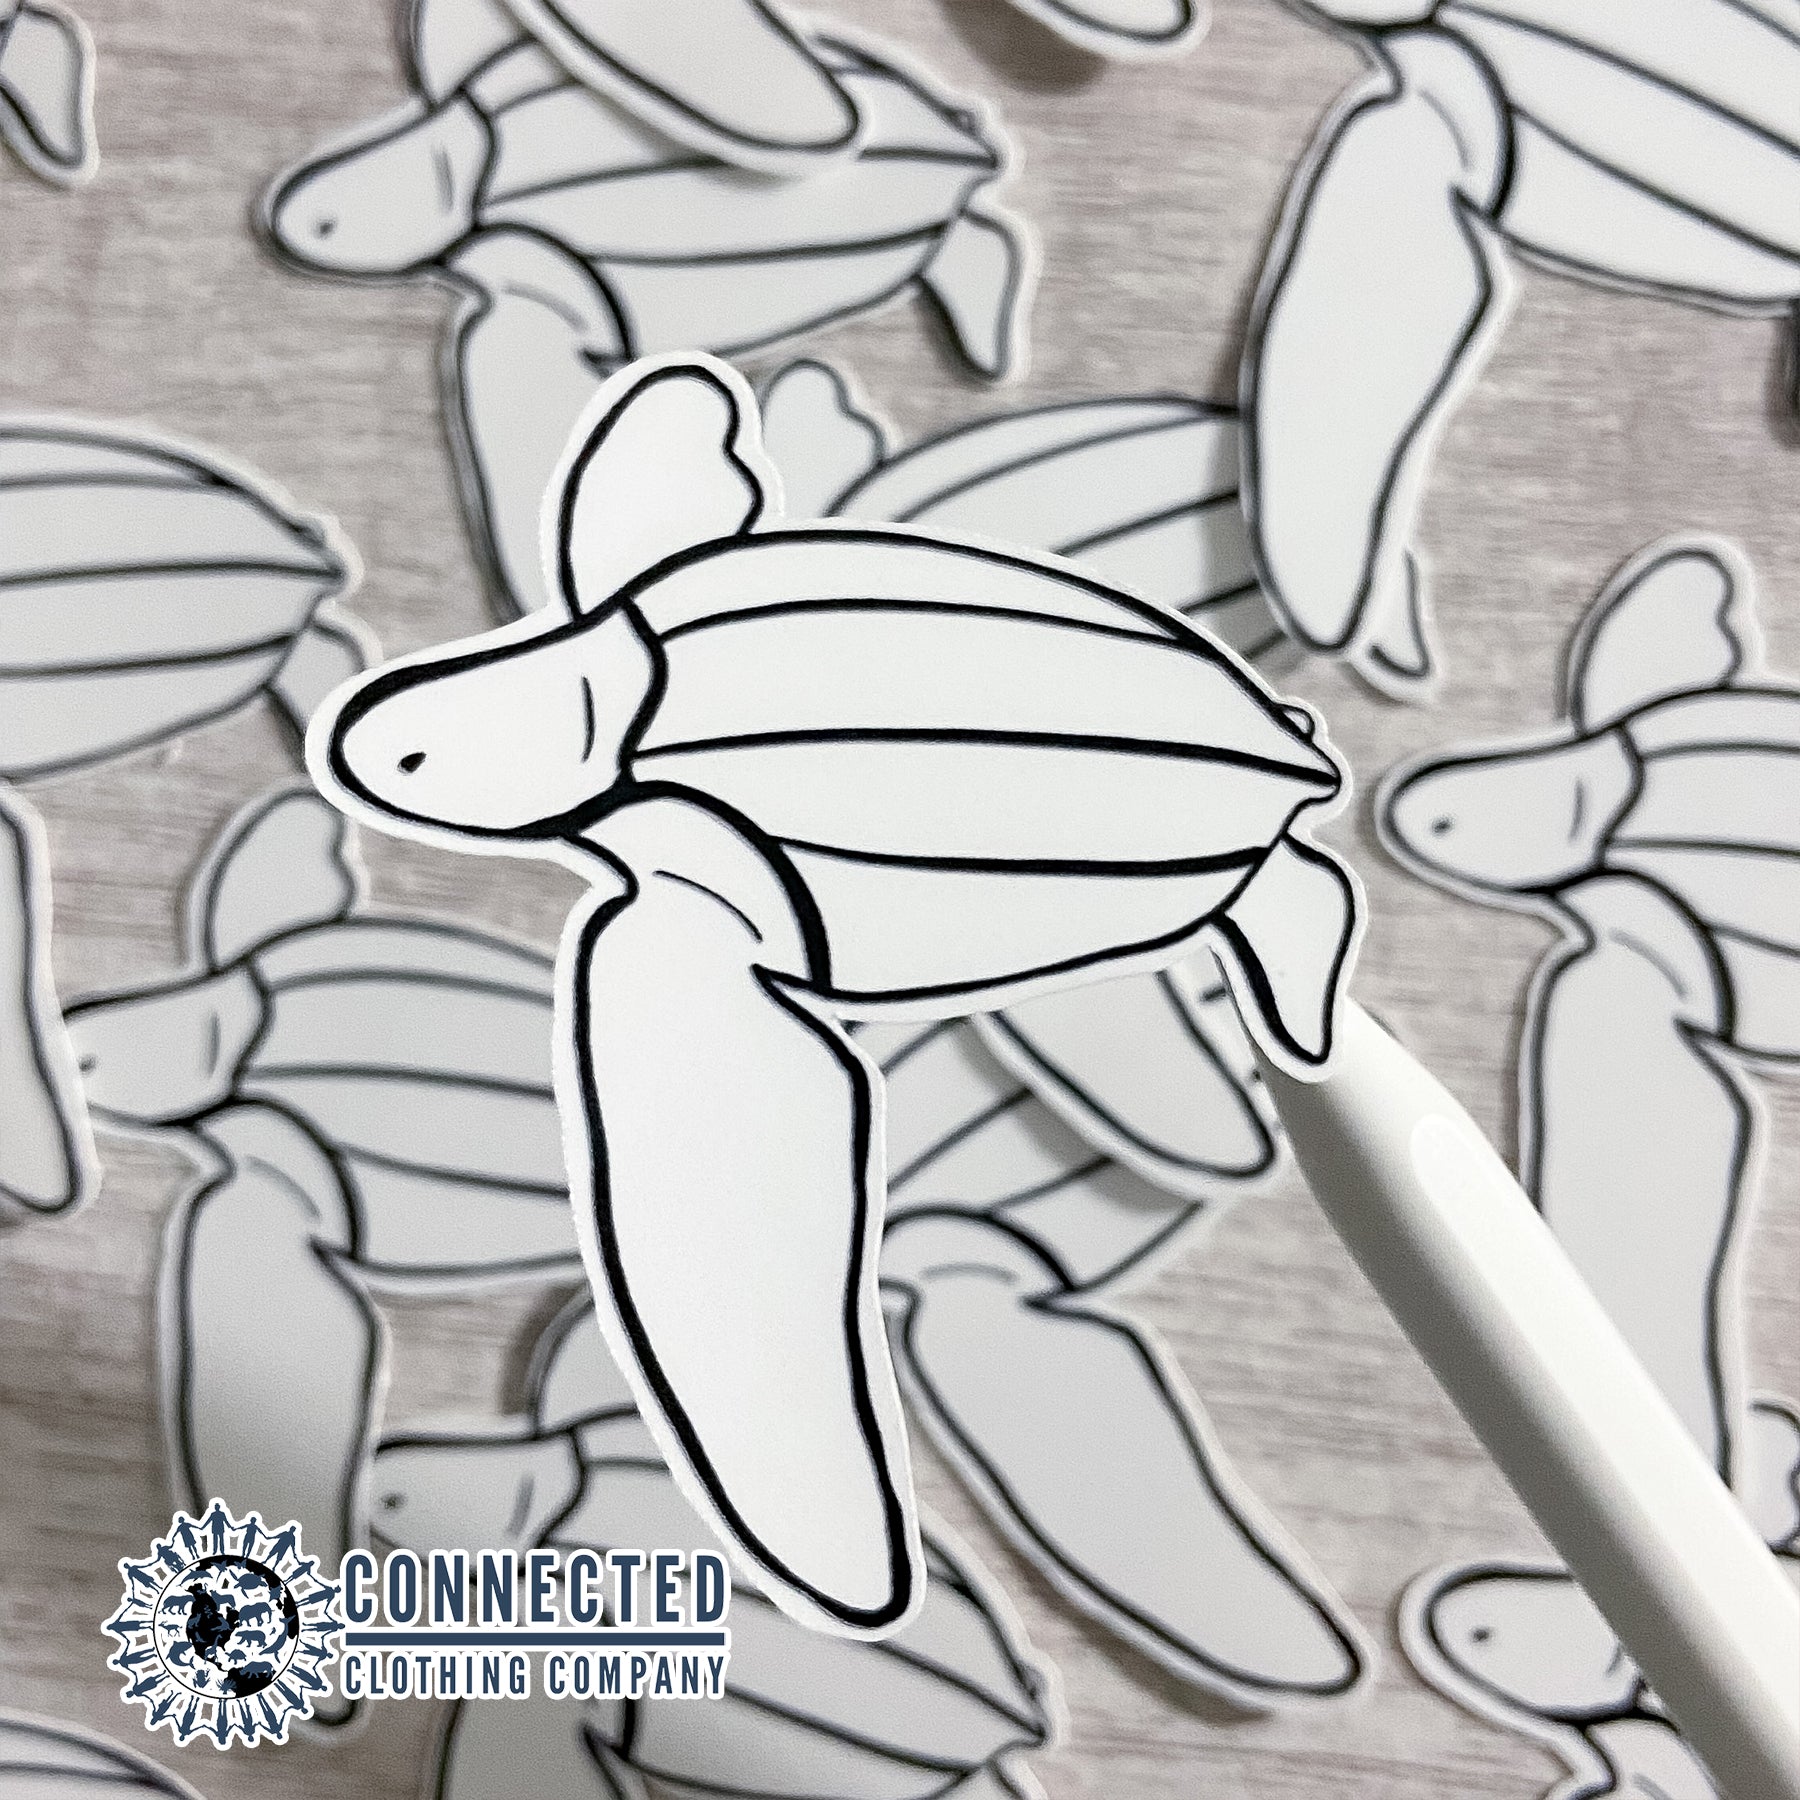 Close up of Leatherback Sea Turtle Sticker - Connected Clothing Company - 10% of profits donated to the Sea Turtle Conservancy